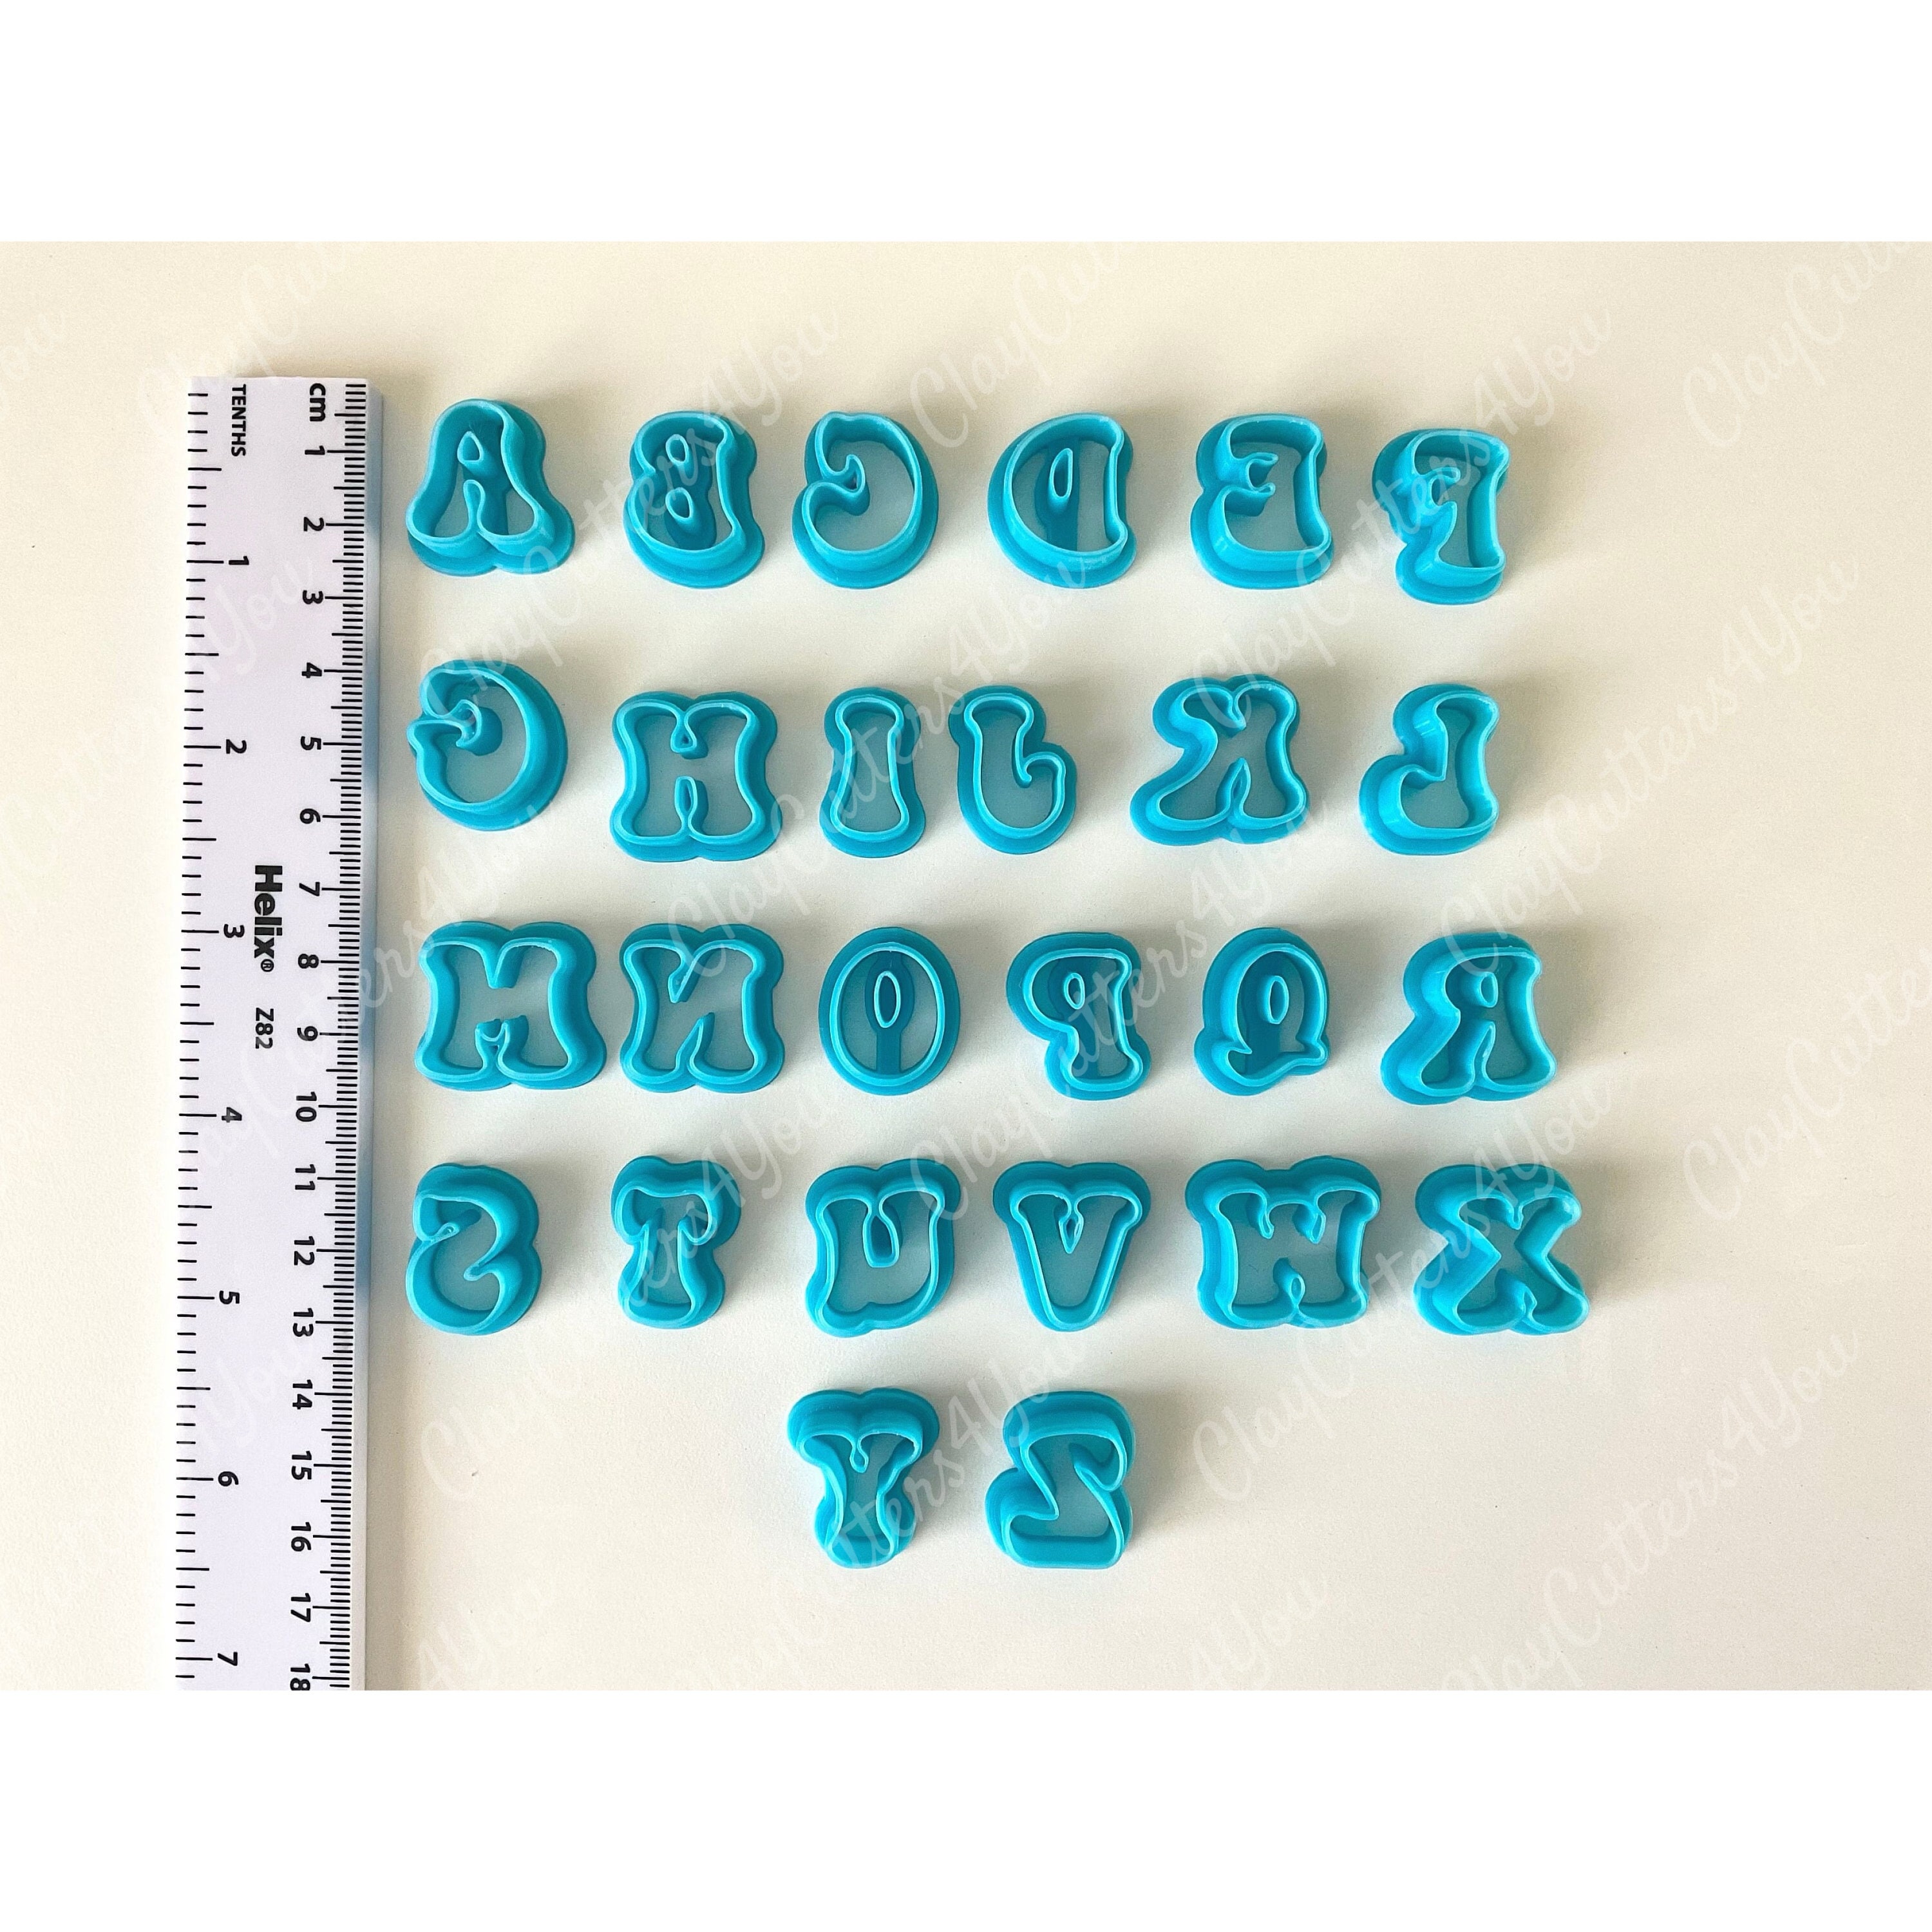 thinkstar 125Pcs Clay Letter Stamp Set Polymer Pottery Craft Handmade  Double Small Alphabet Number Perforator Indentation